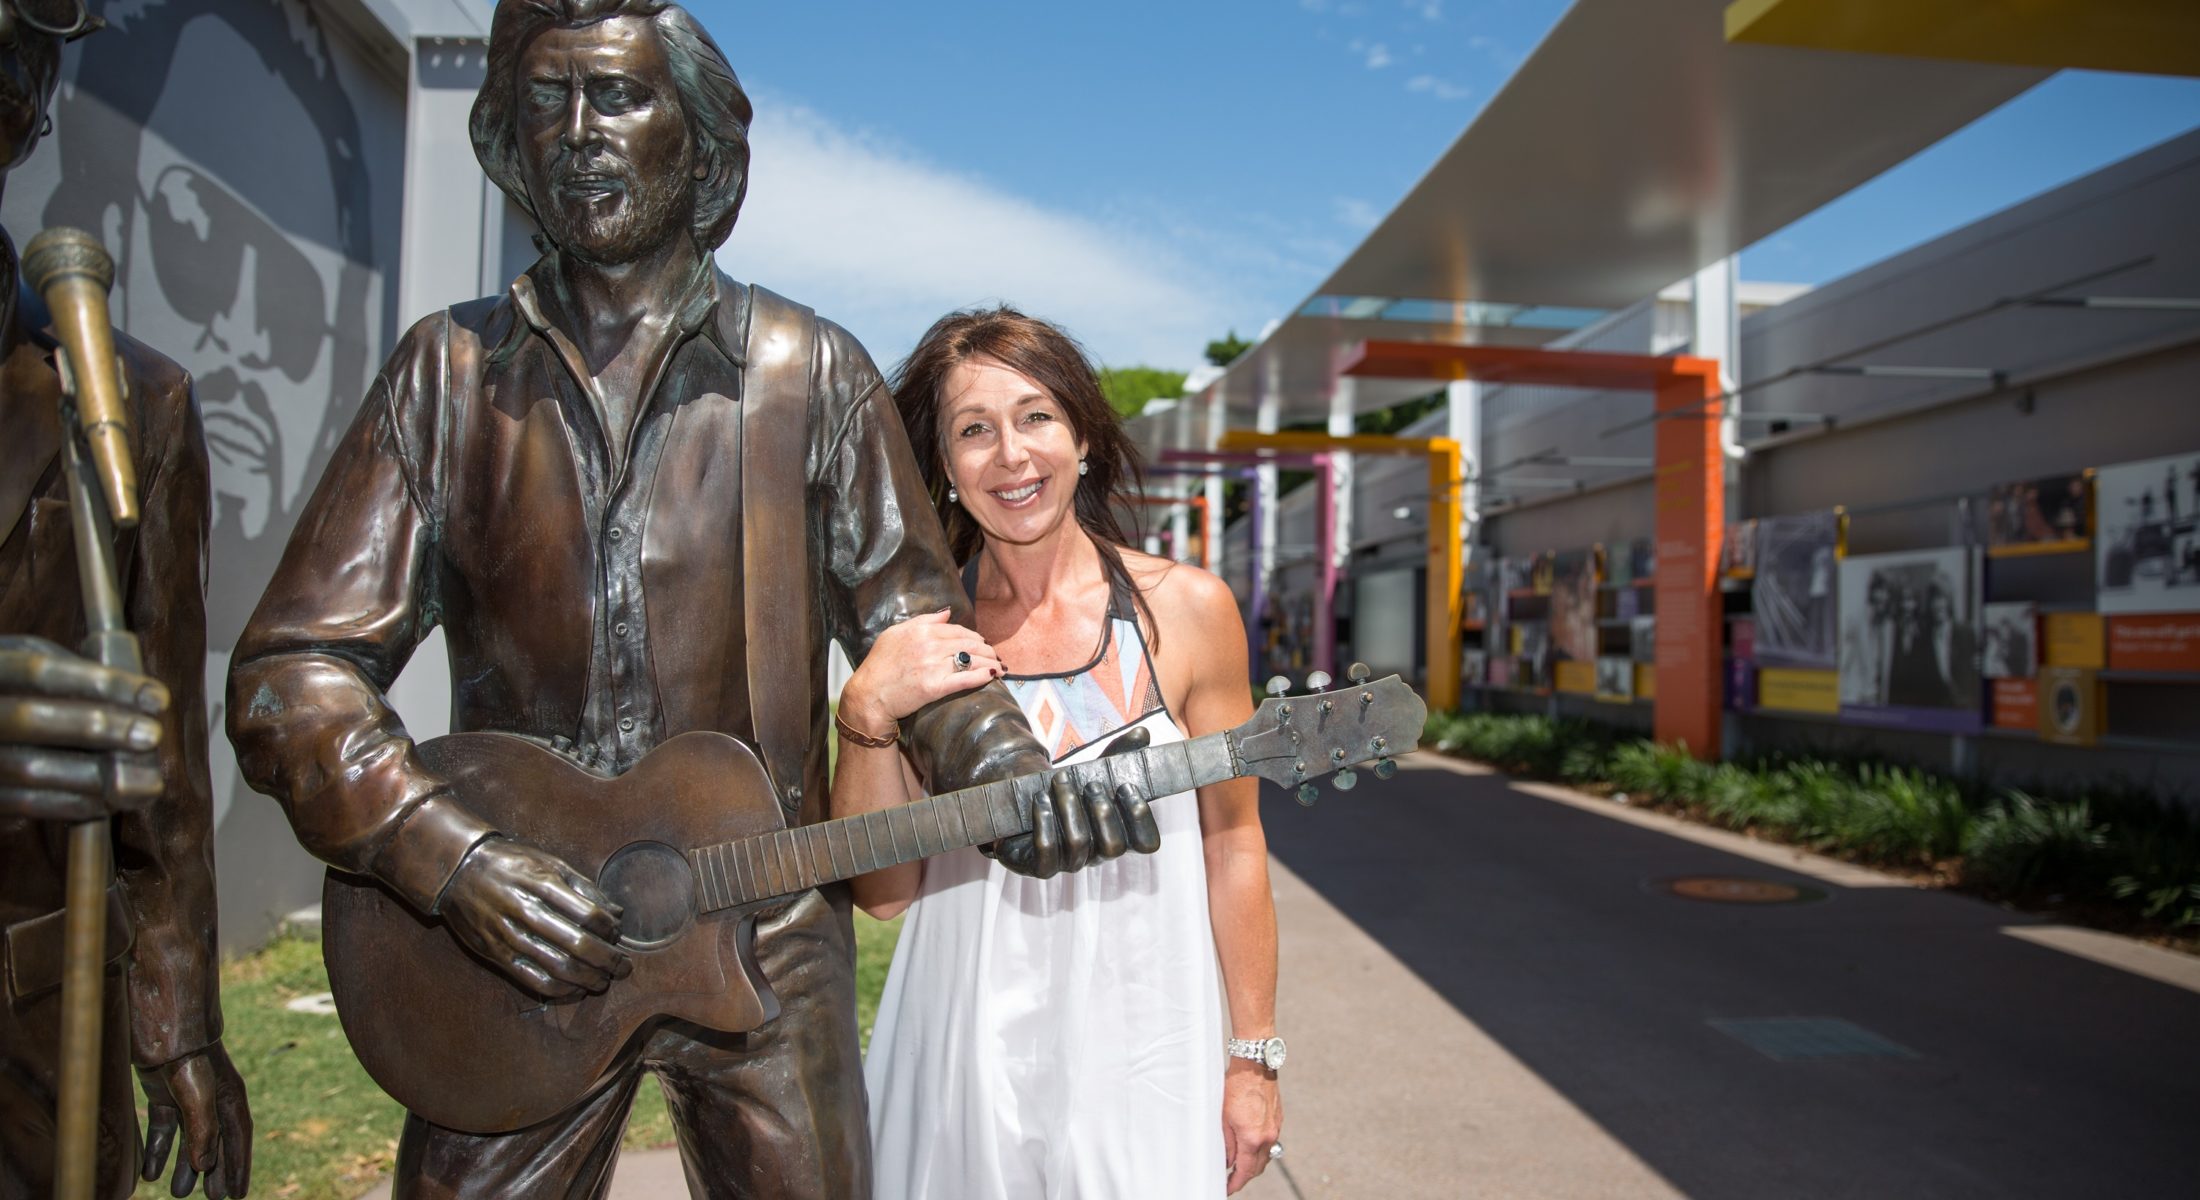 Bee Gees Way Barry Gibb Statue With Woman Redcliffe In Moreton Bay Region 2